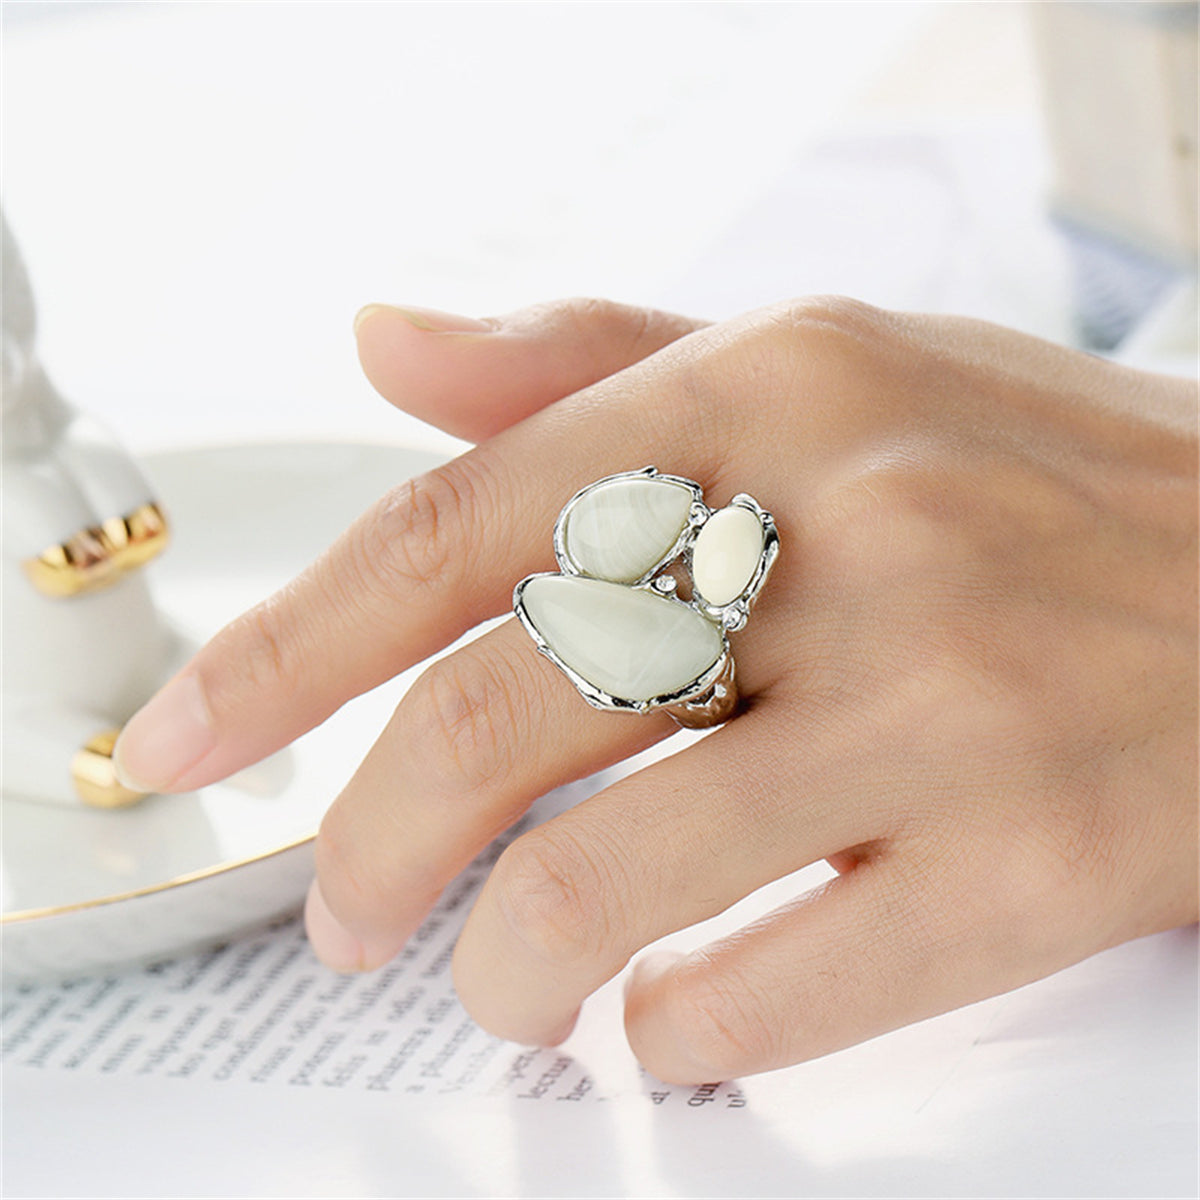 White Cats Eye Silver-Plated Abstract Ring